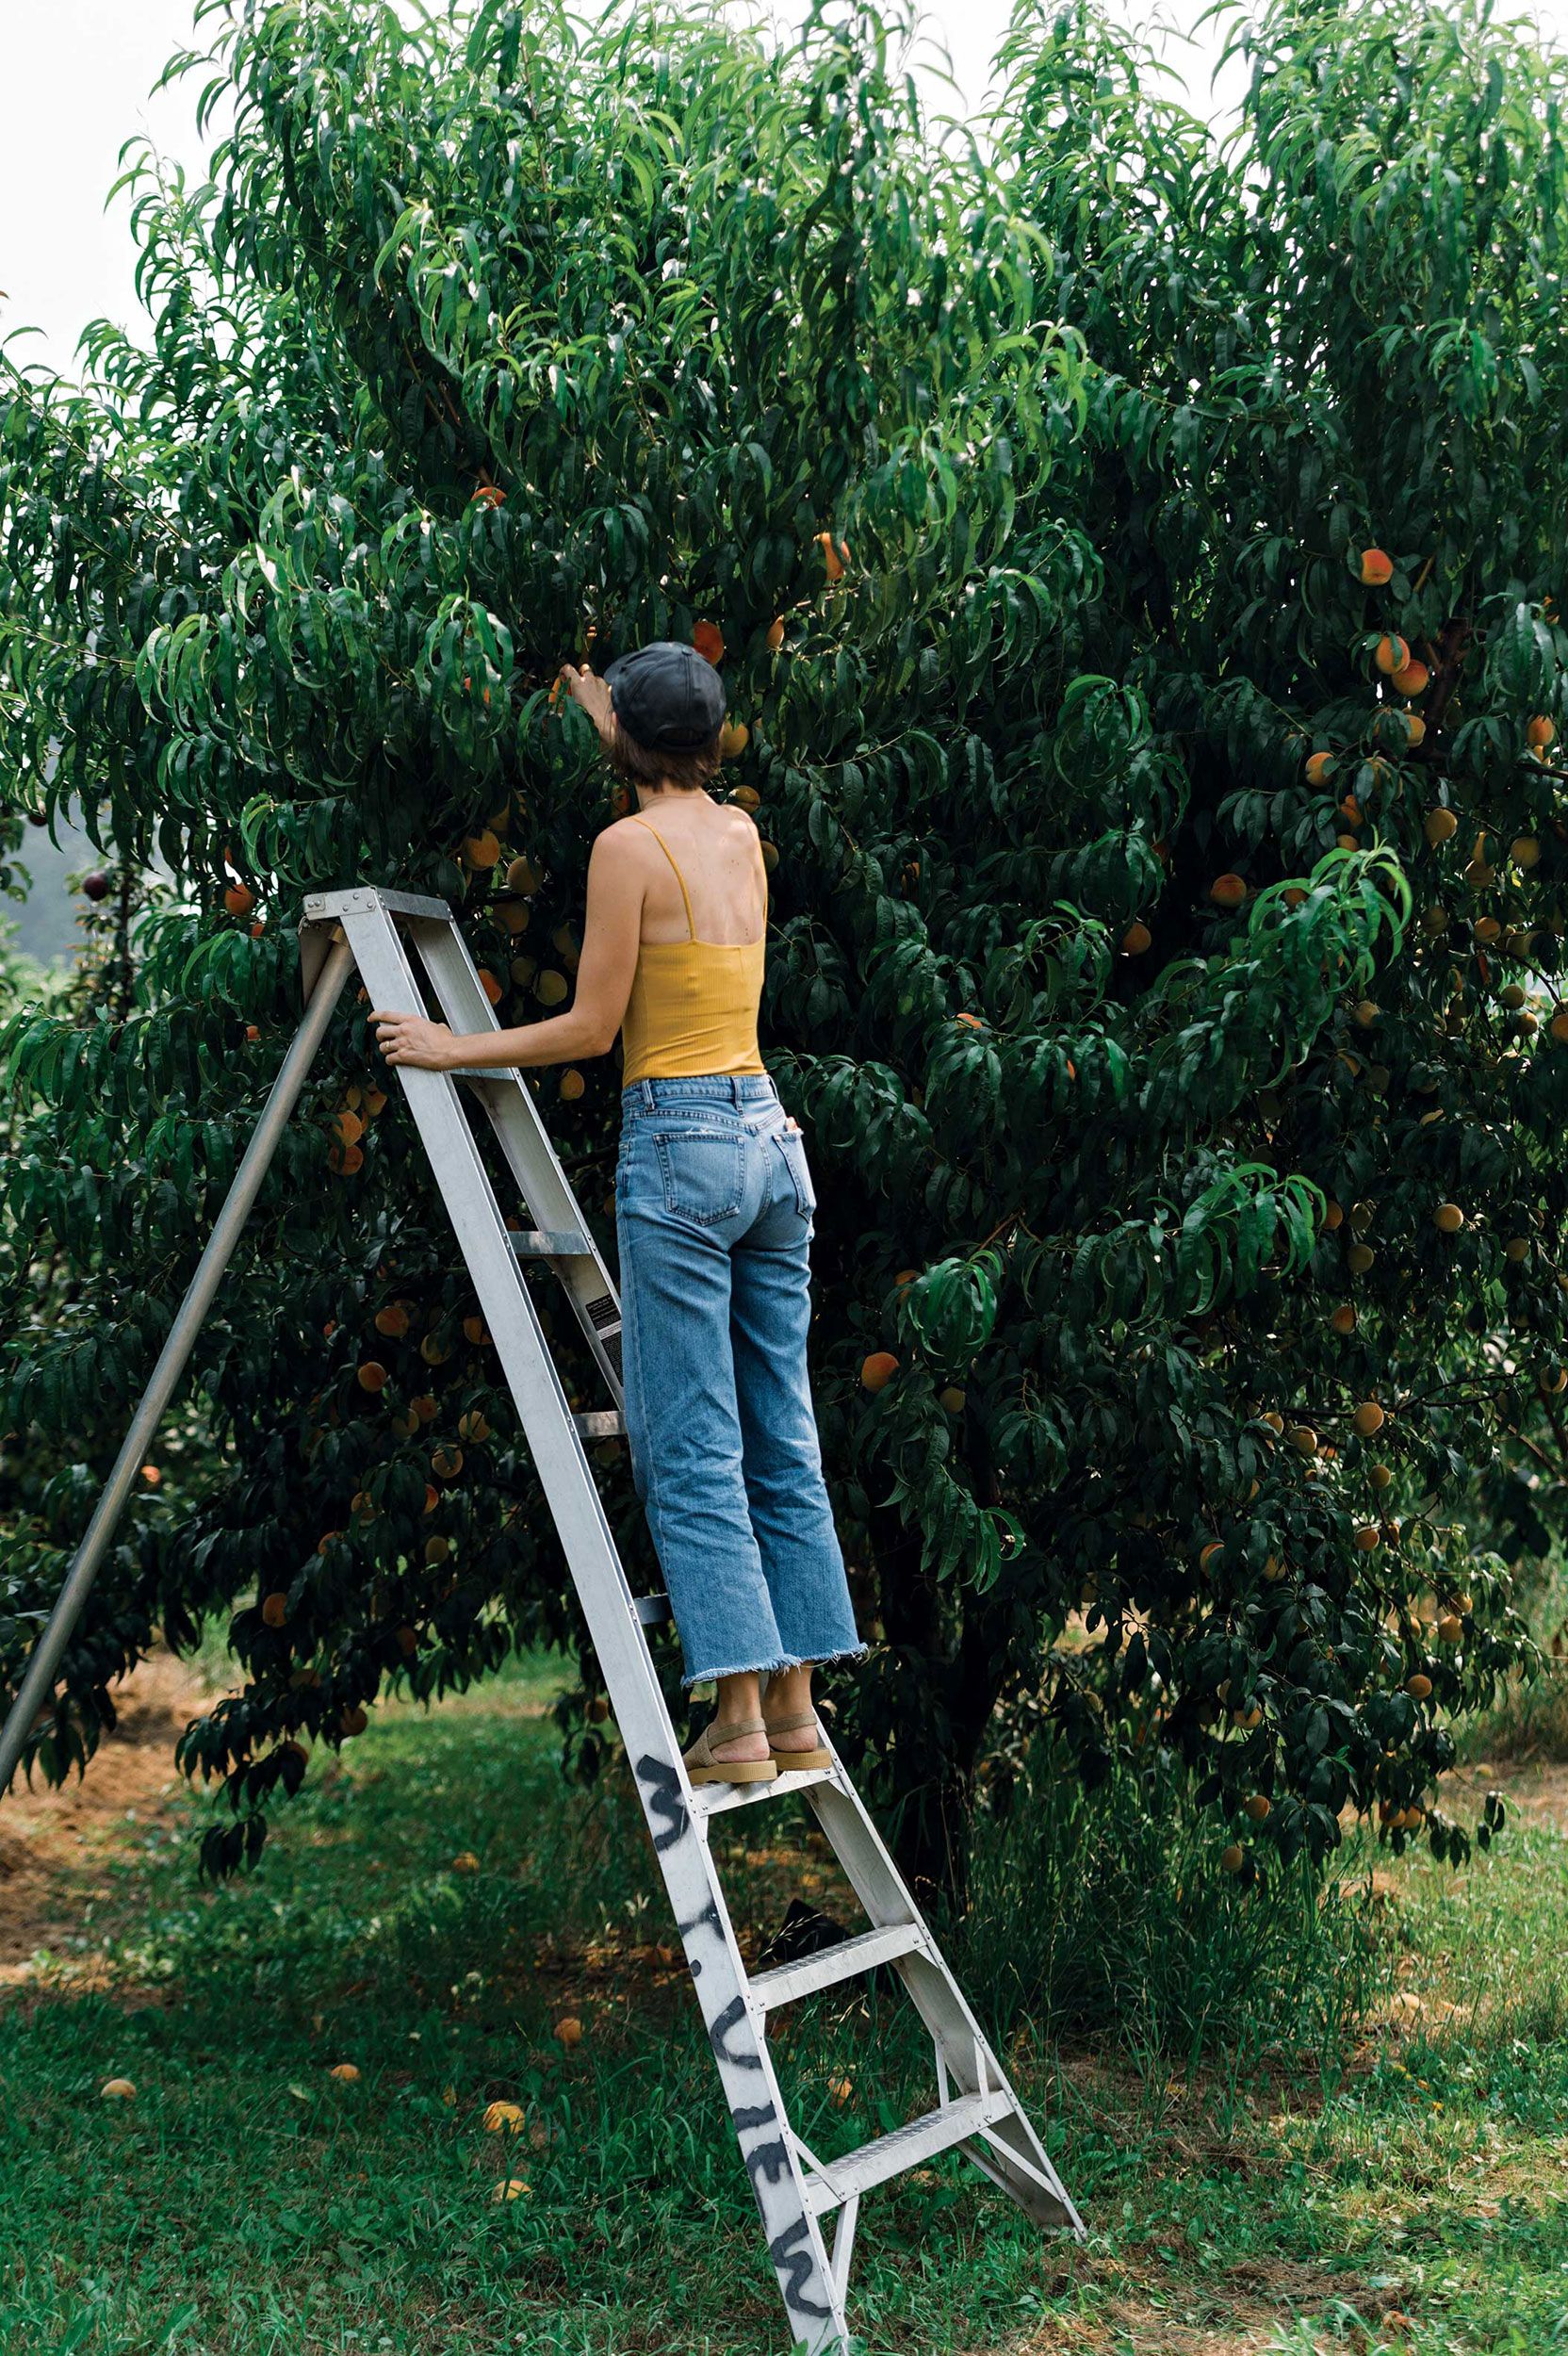 A woman on a ladder picking peaches off a tree.